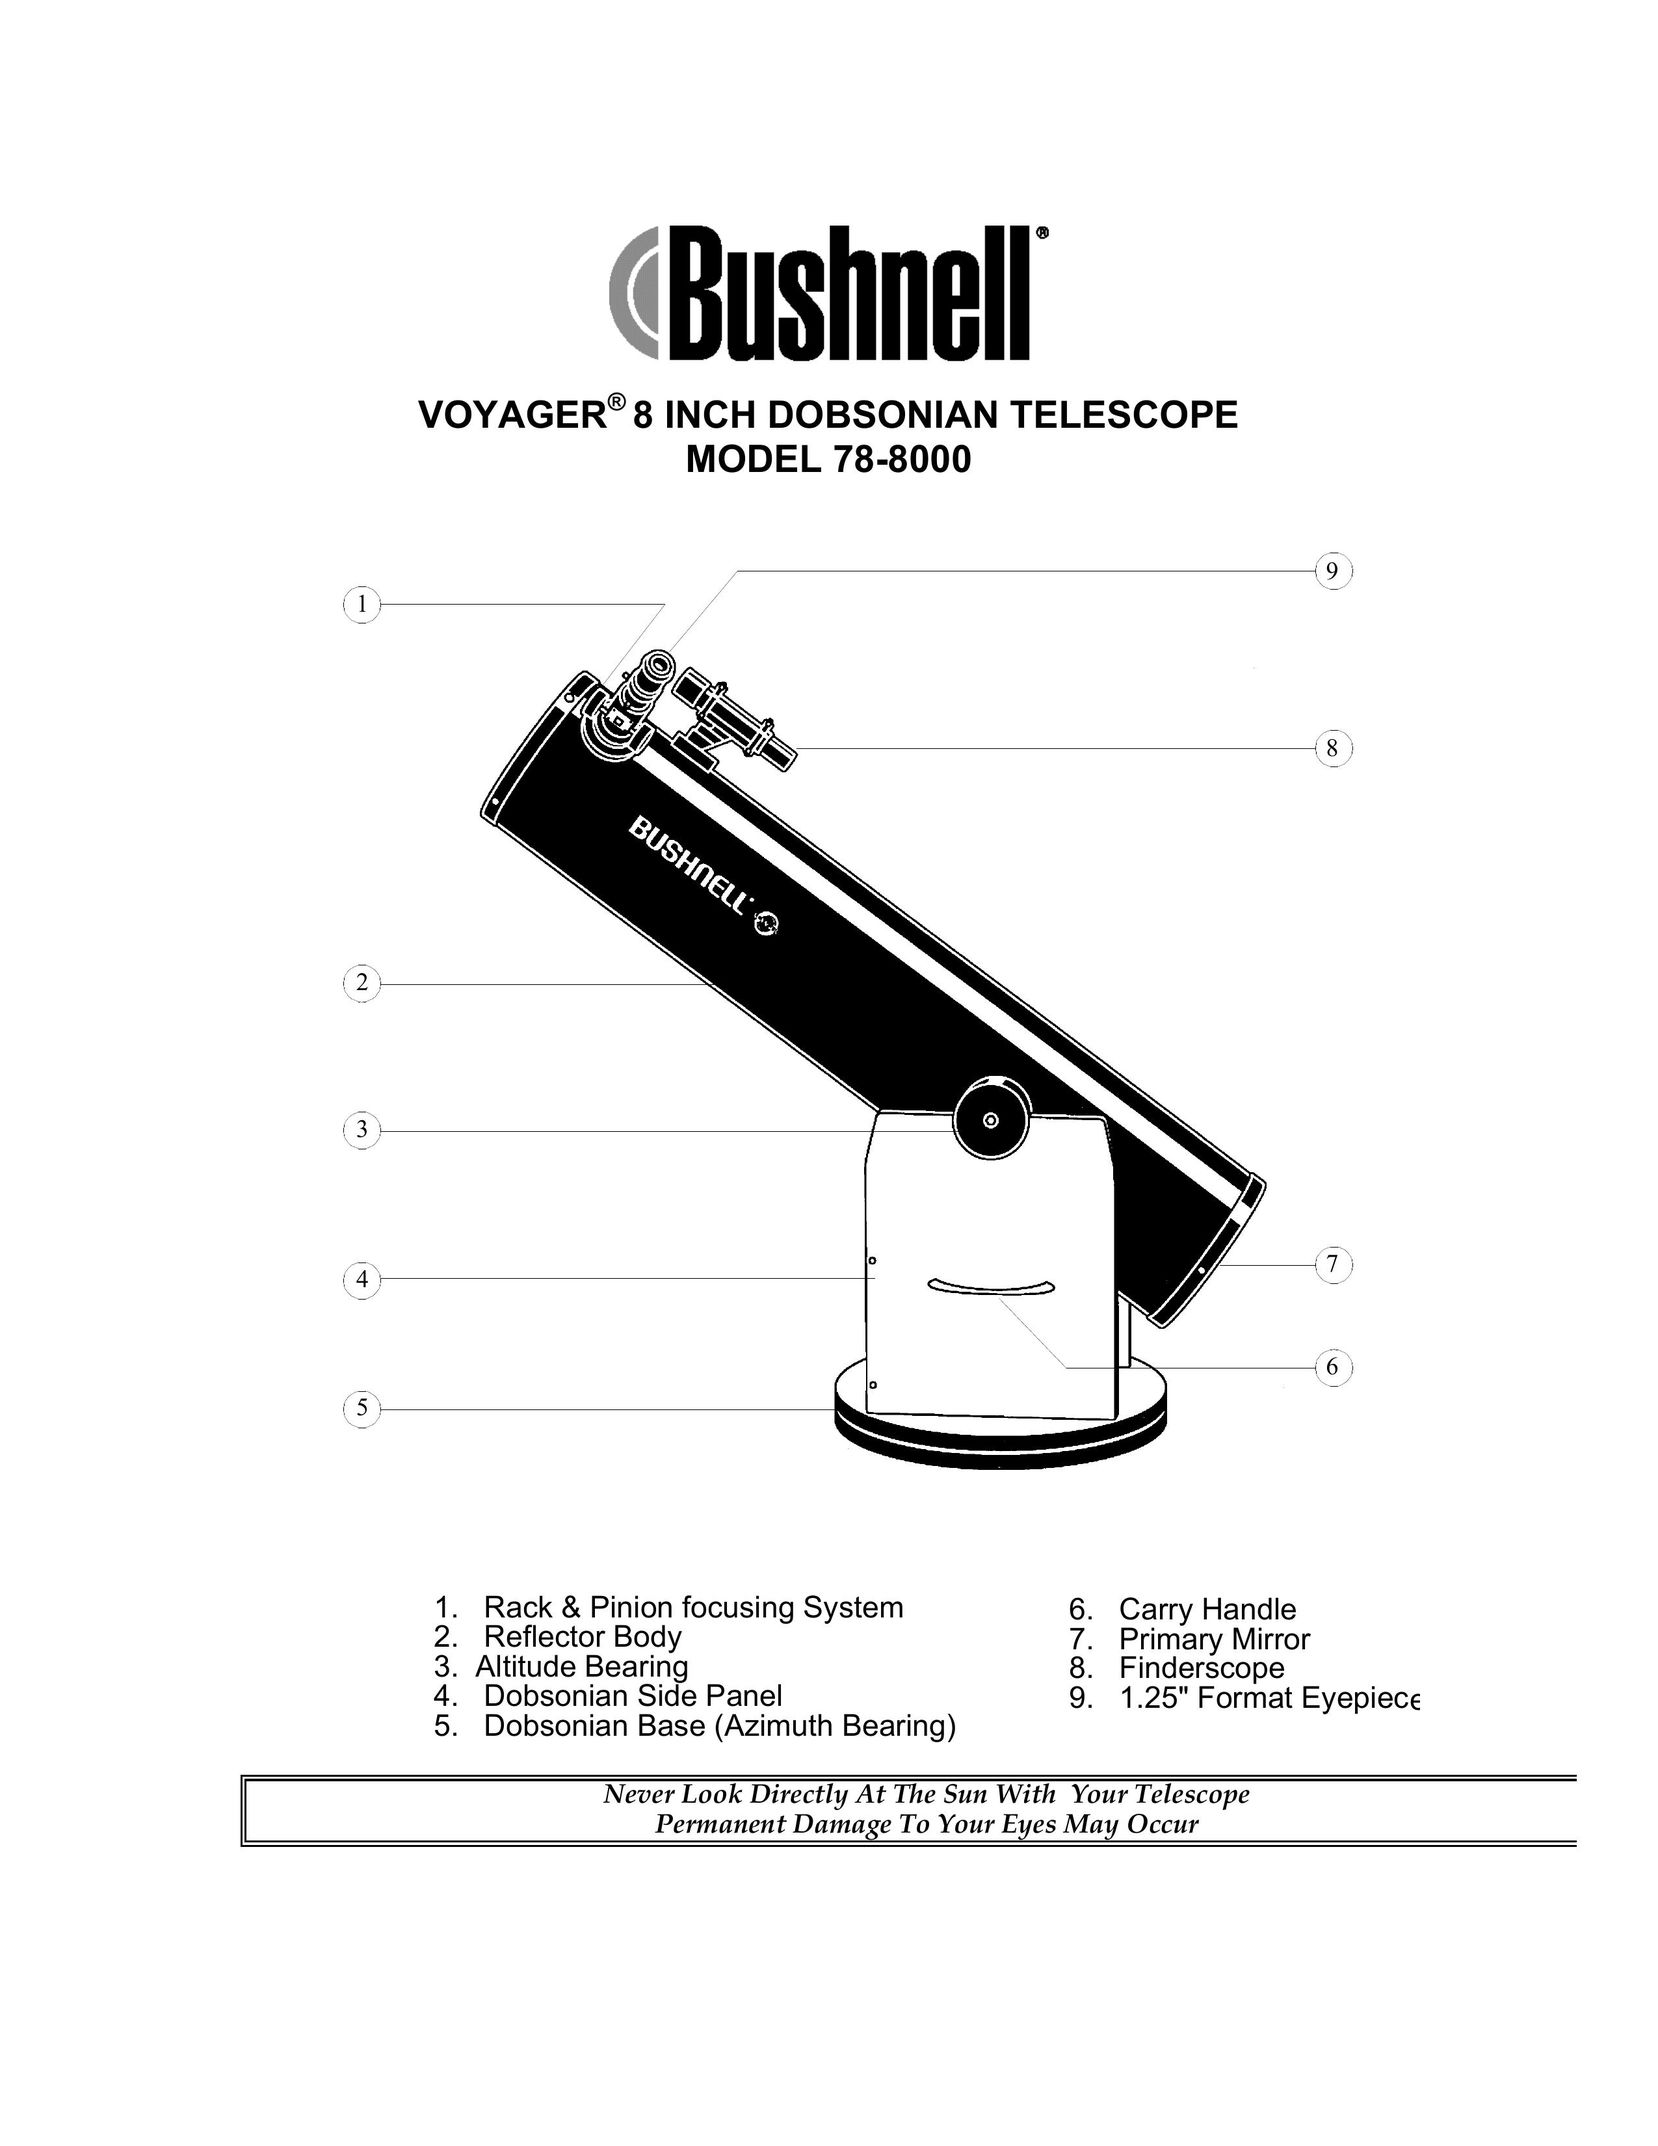 Bushnell 78-8000 Home Security System User Manual